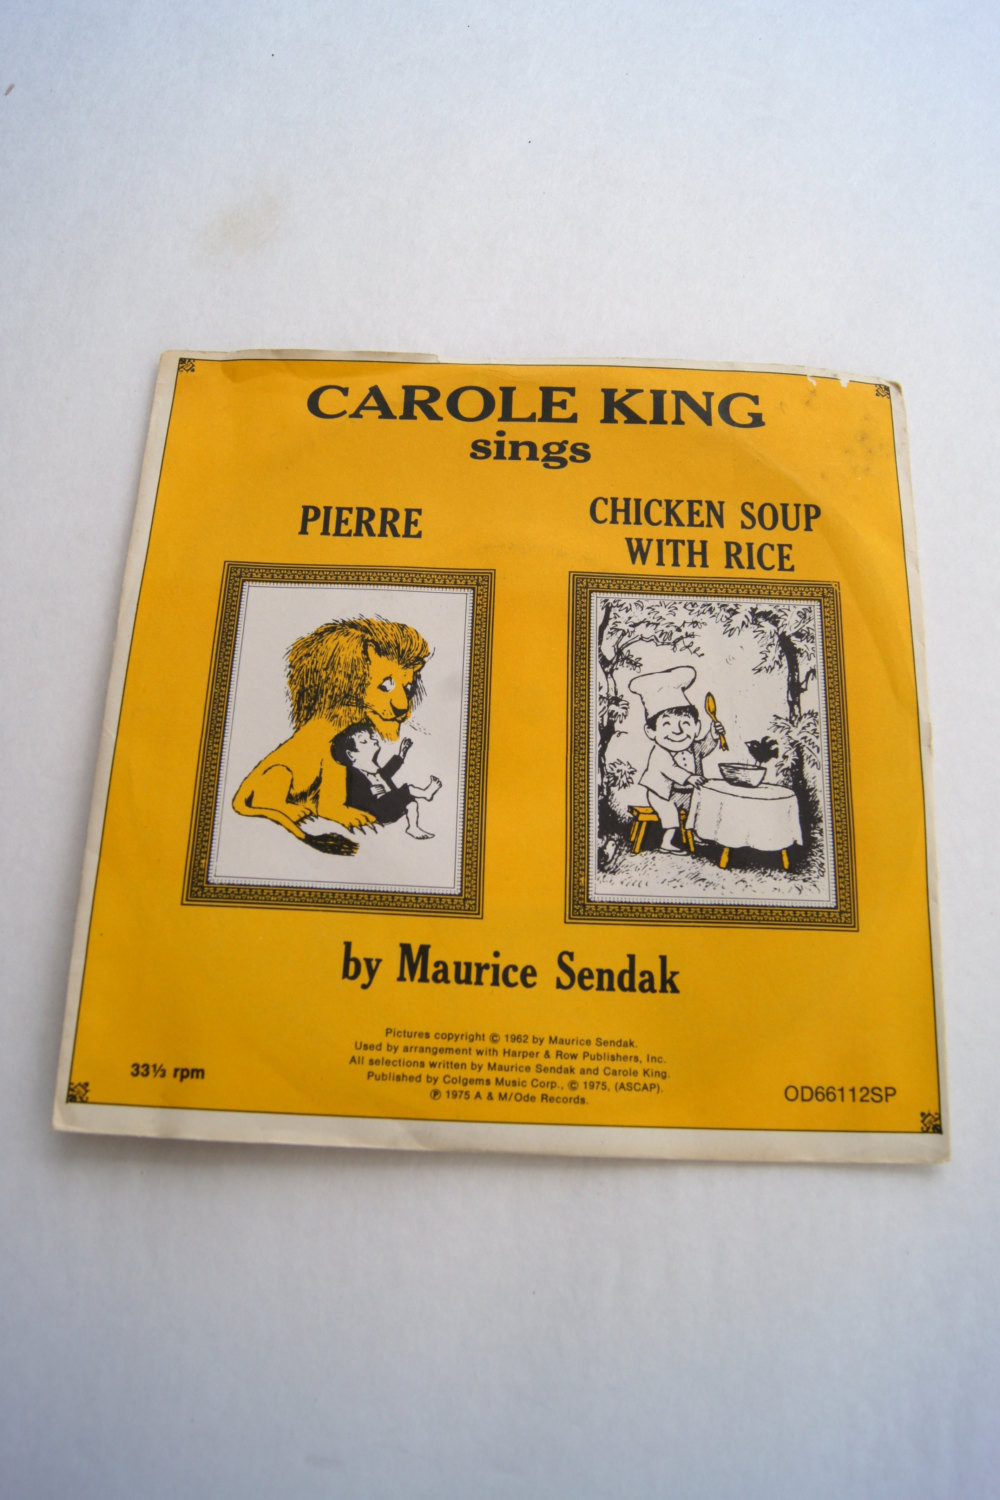 Chicken Soup With Rice Song
 Carole King Sings Pierre and Chicken Soup with Rice By Maurice